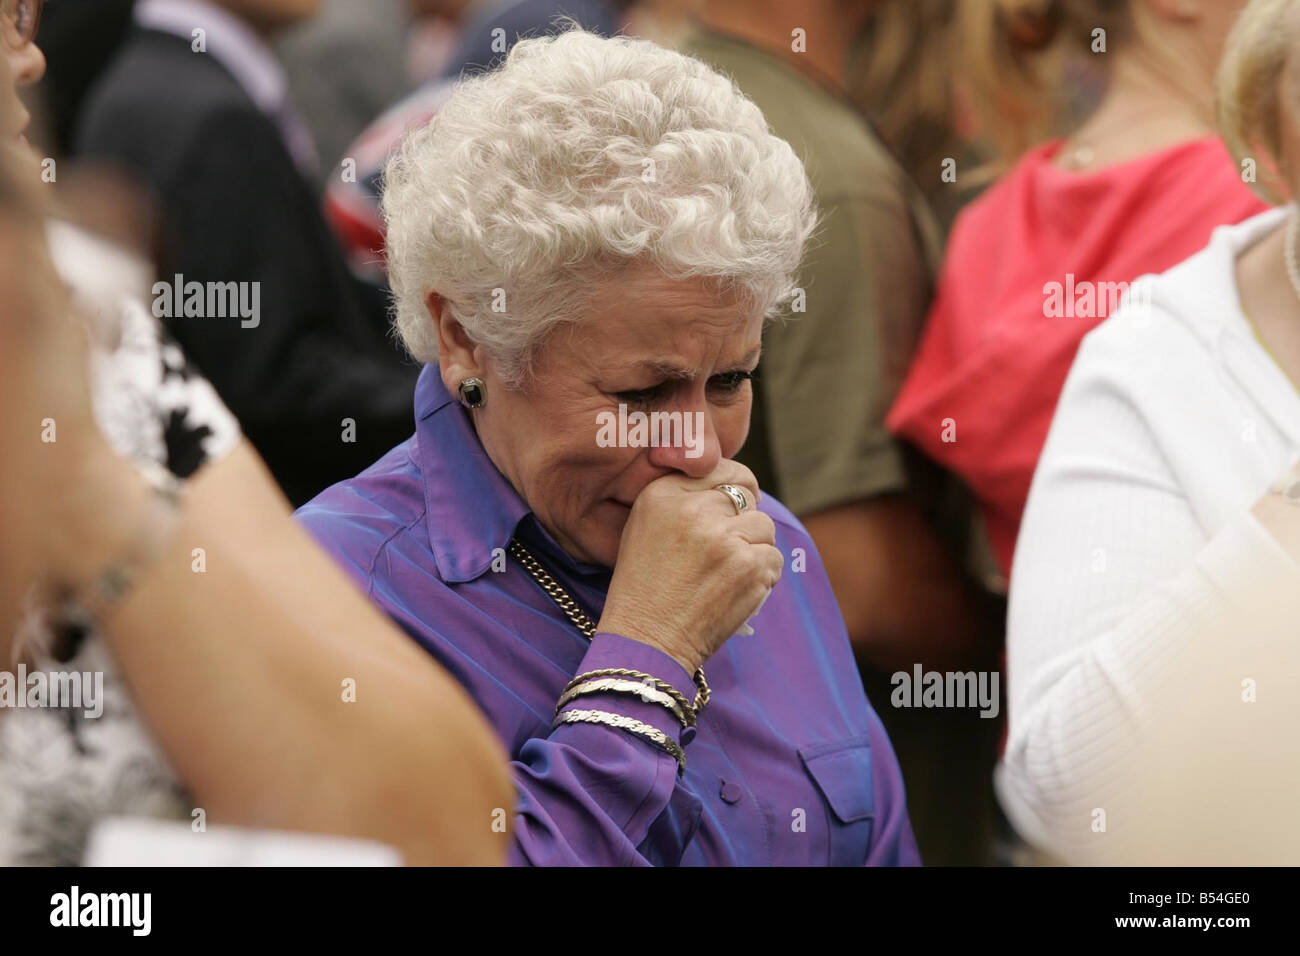 Members of the public listen on to the memorial service held for Princess Diana at the Guards Chapel in London on the 10th anniversary of her death Some are overcome with emotion and start to cry Stock Photo